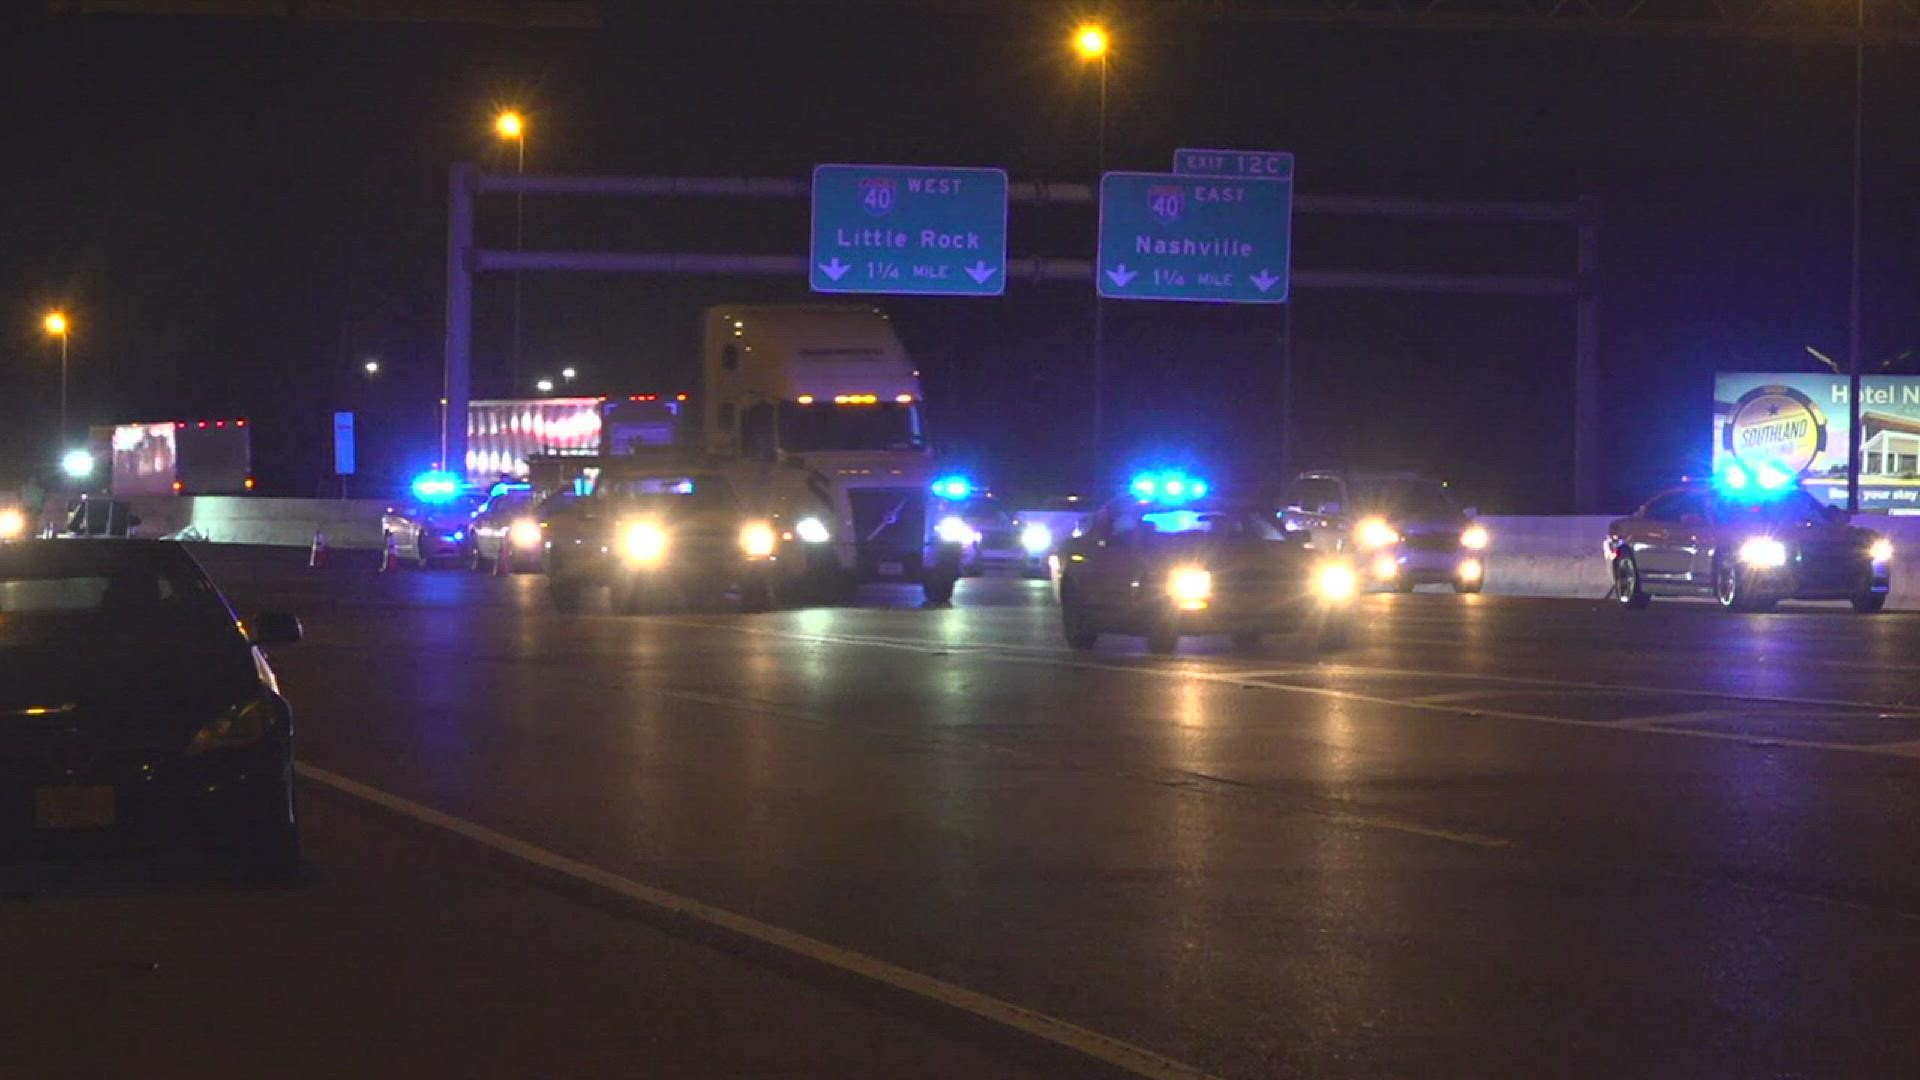 A pedestrian was killed after being hit by a car on I-240 near Walnut Grove. MPD said the investigation is ongoing.